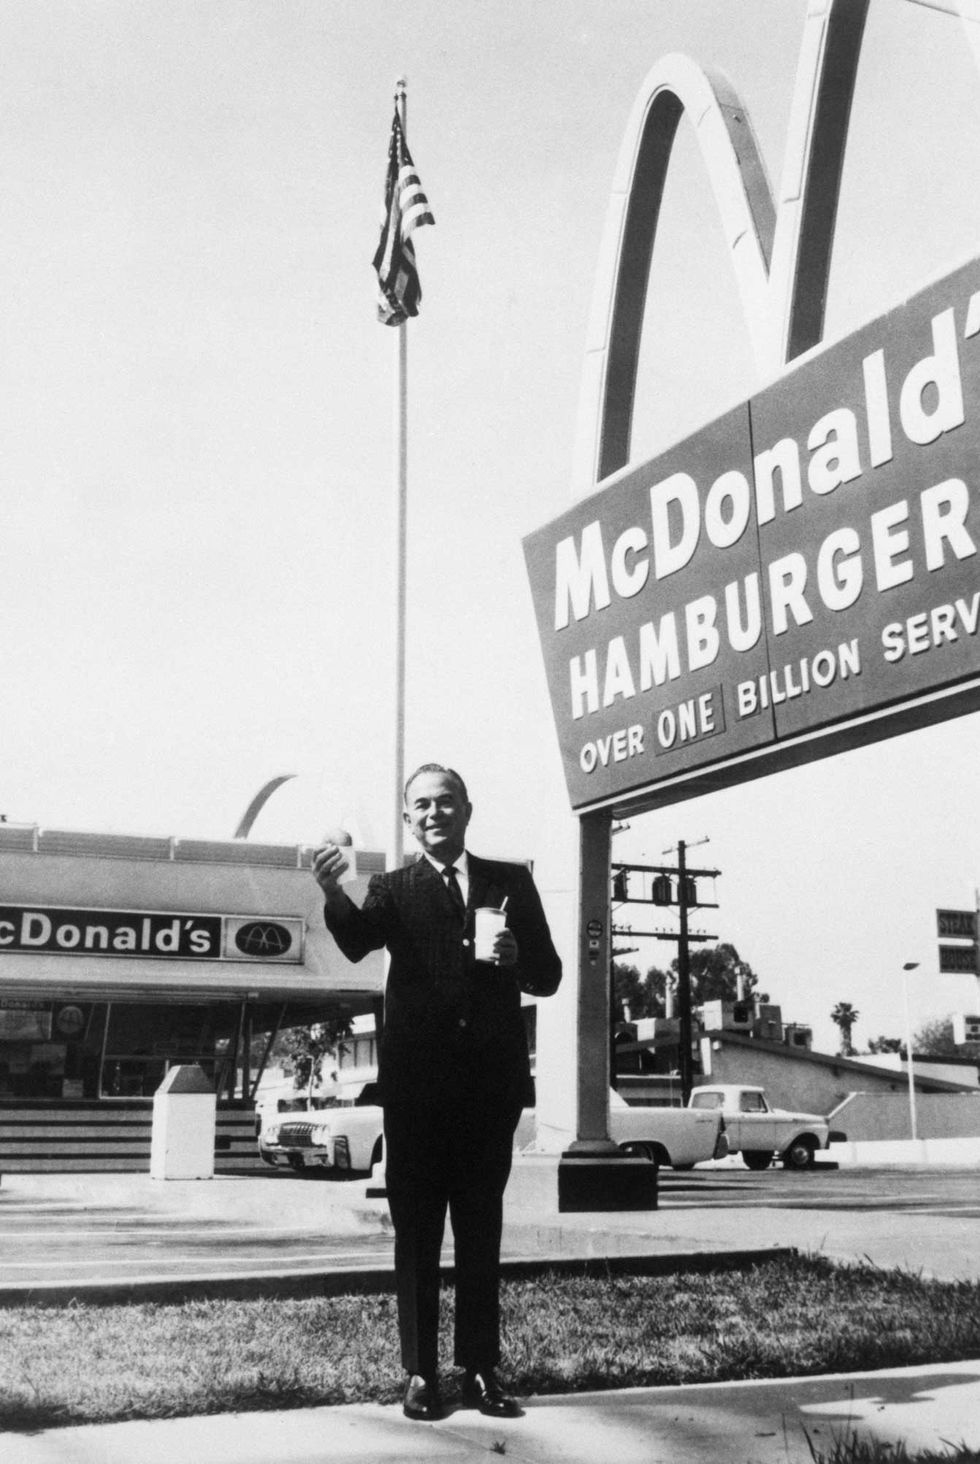 ray kroc is seen outside of mcdonald’s in this 1960 shot while he was founder and chairman of mcdonald’s, his relationship with the mcdonald’s brothers wasn’t all hugs and smiles